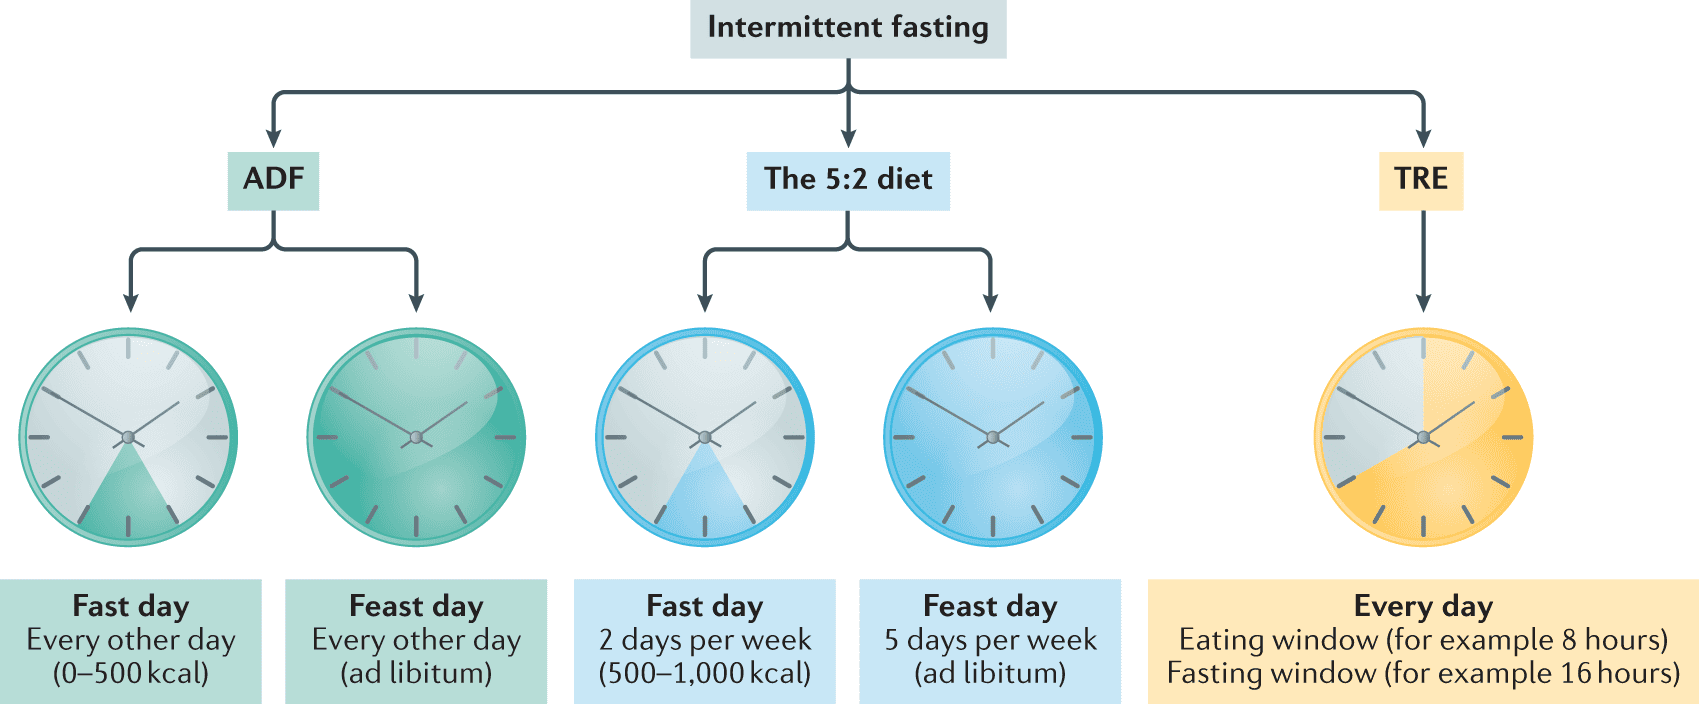 Exploring the Positive Effects of Intermittent Fasting